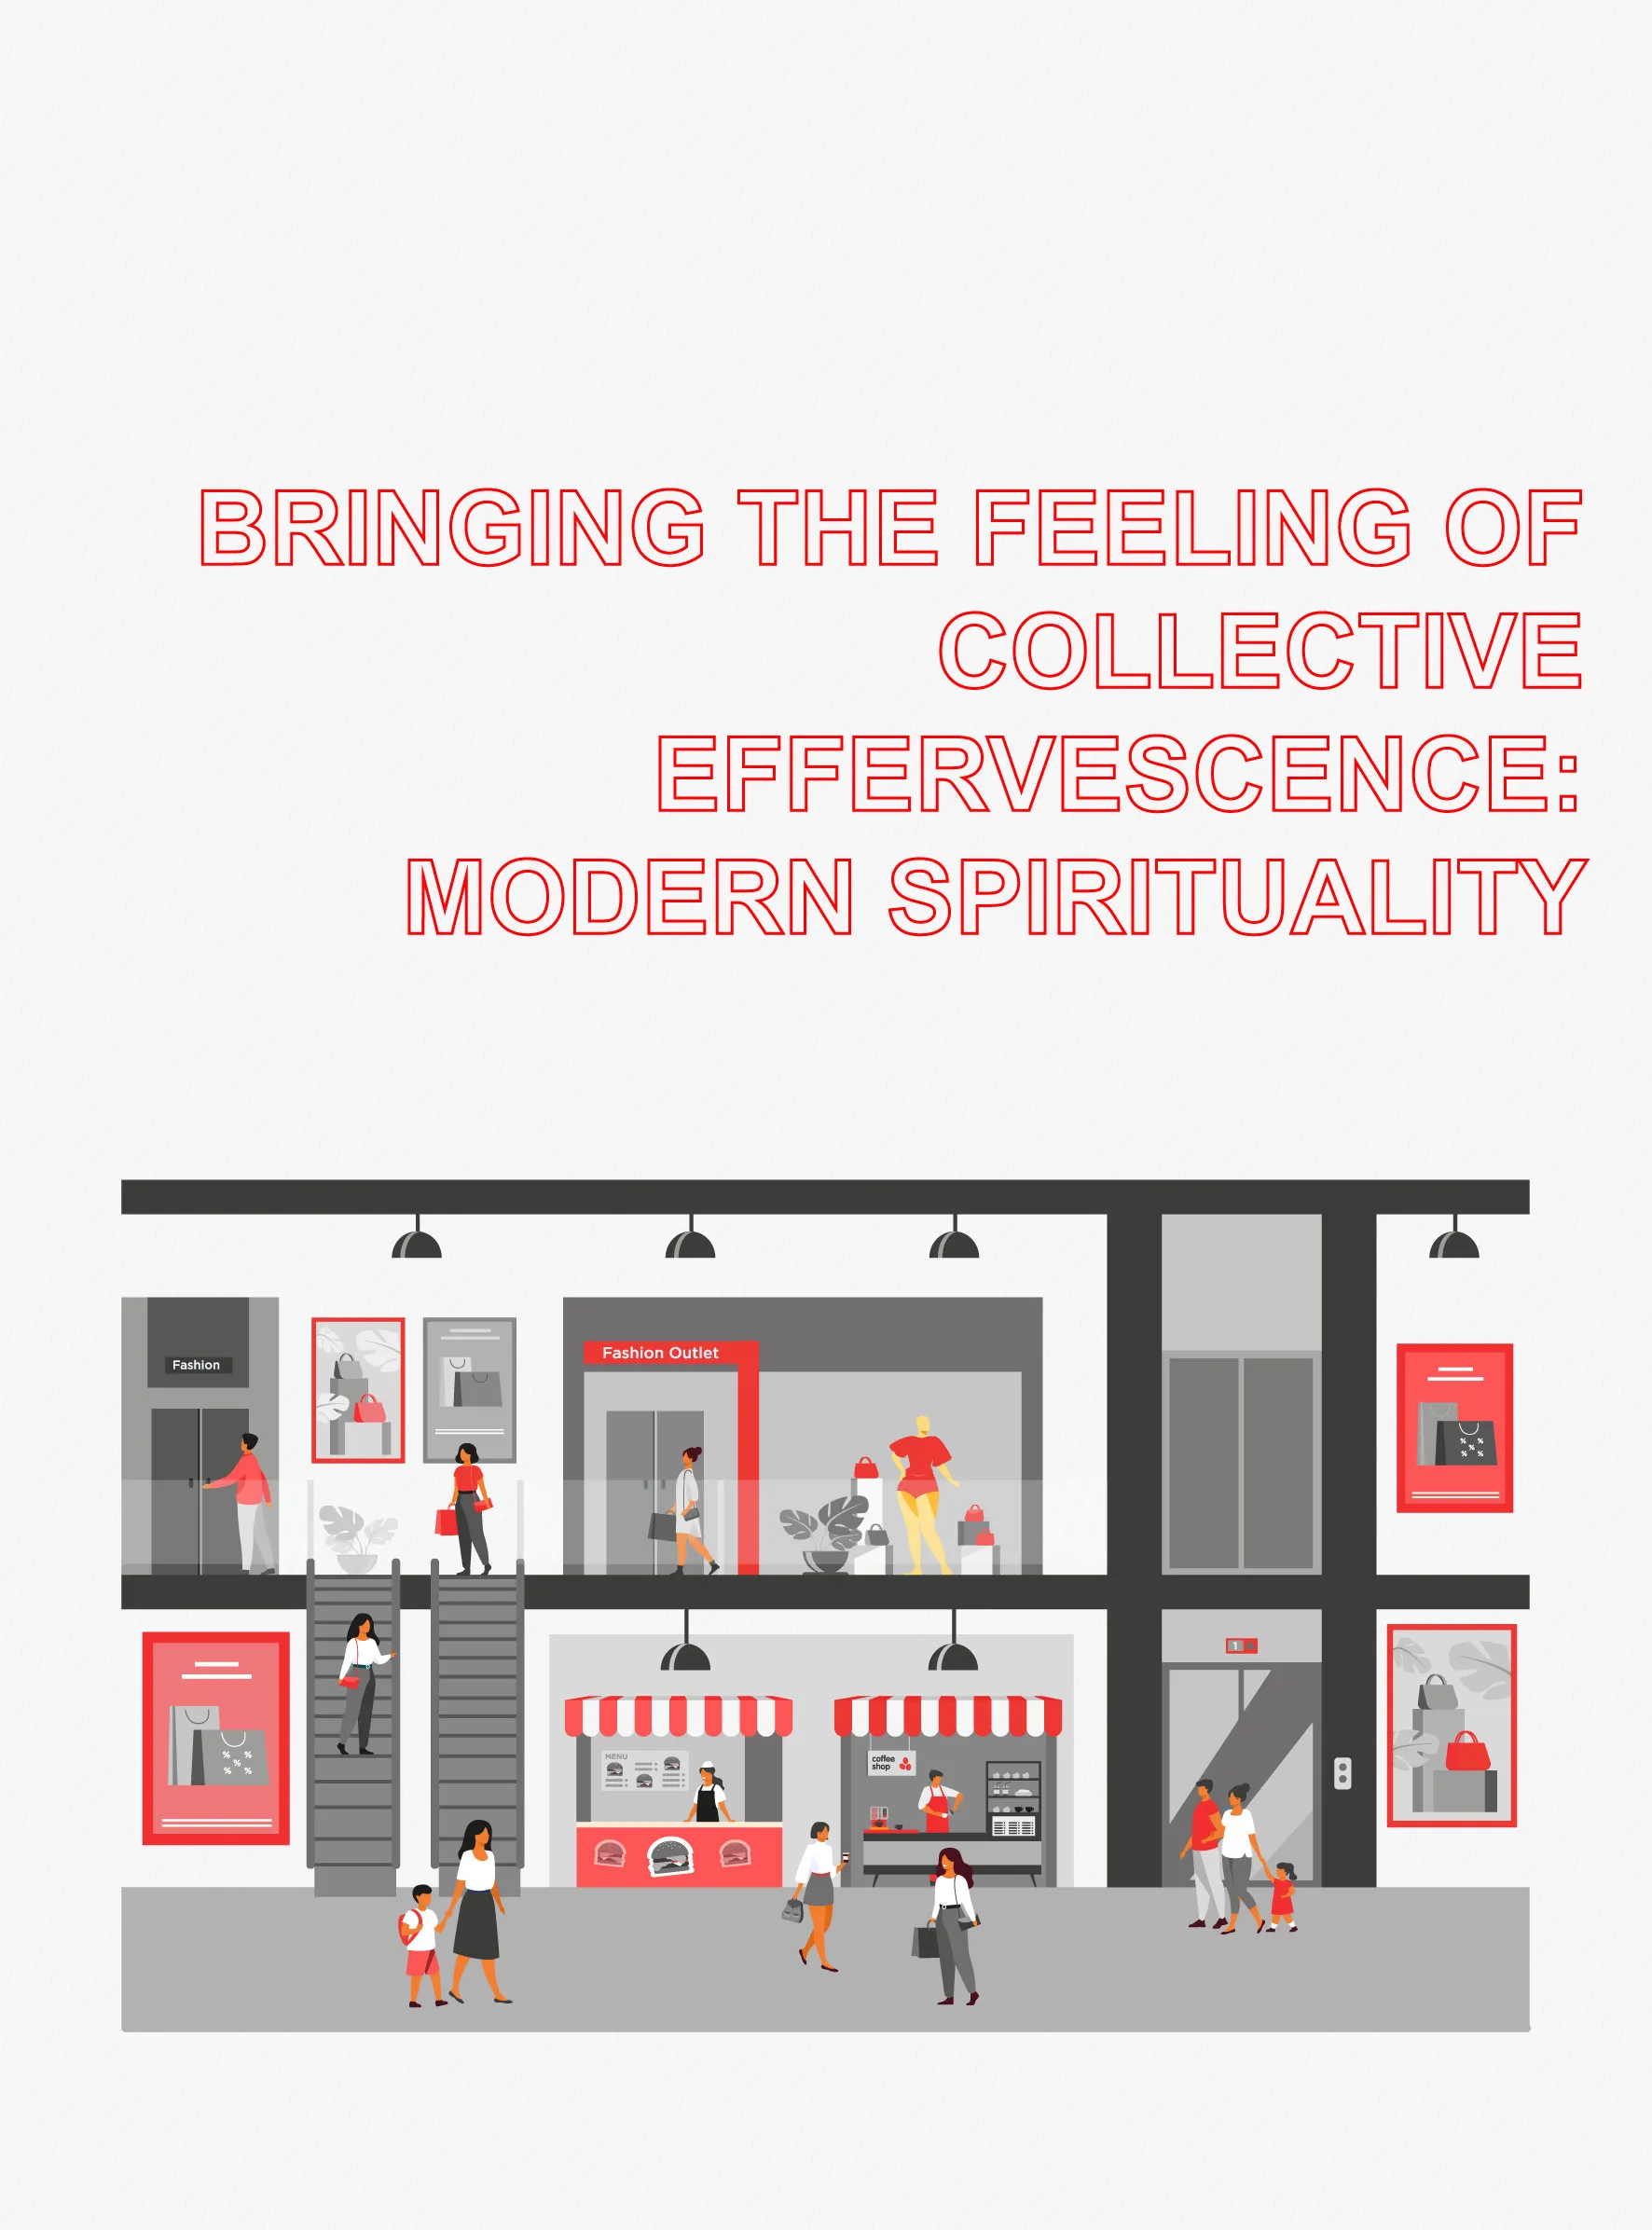 Bringing the feeling of collective effervescence: modern spirituality